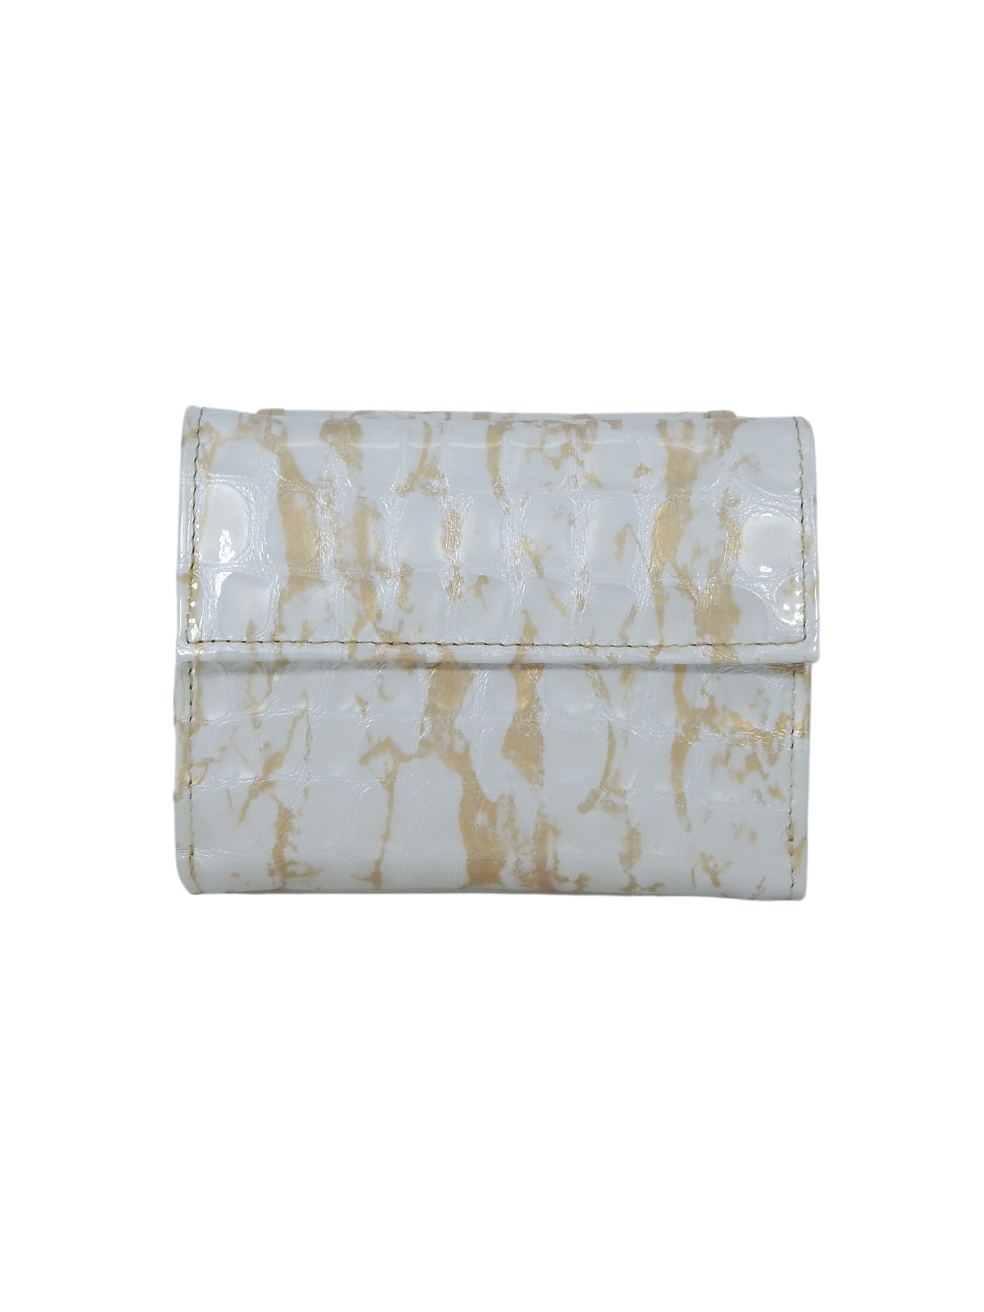 Cavalinho Gallop Patent Leather Wallet for Women SKU 28170215.31 #color_Beige / White